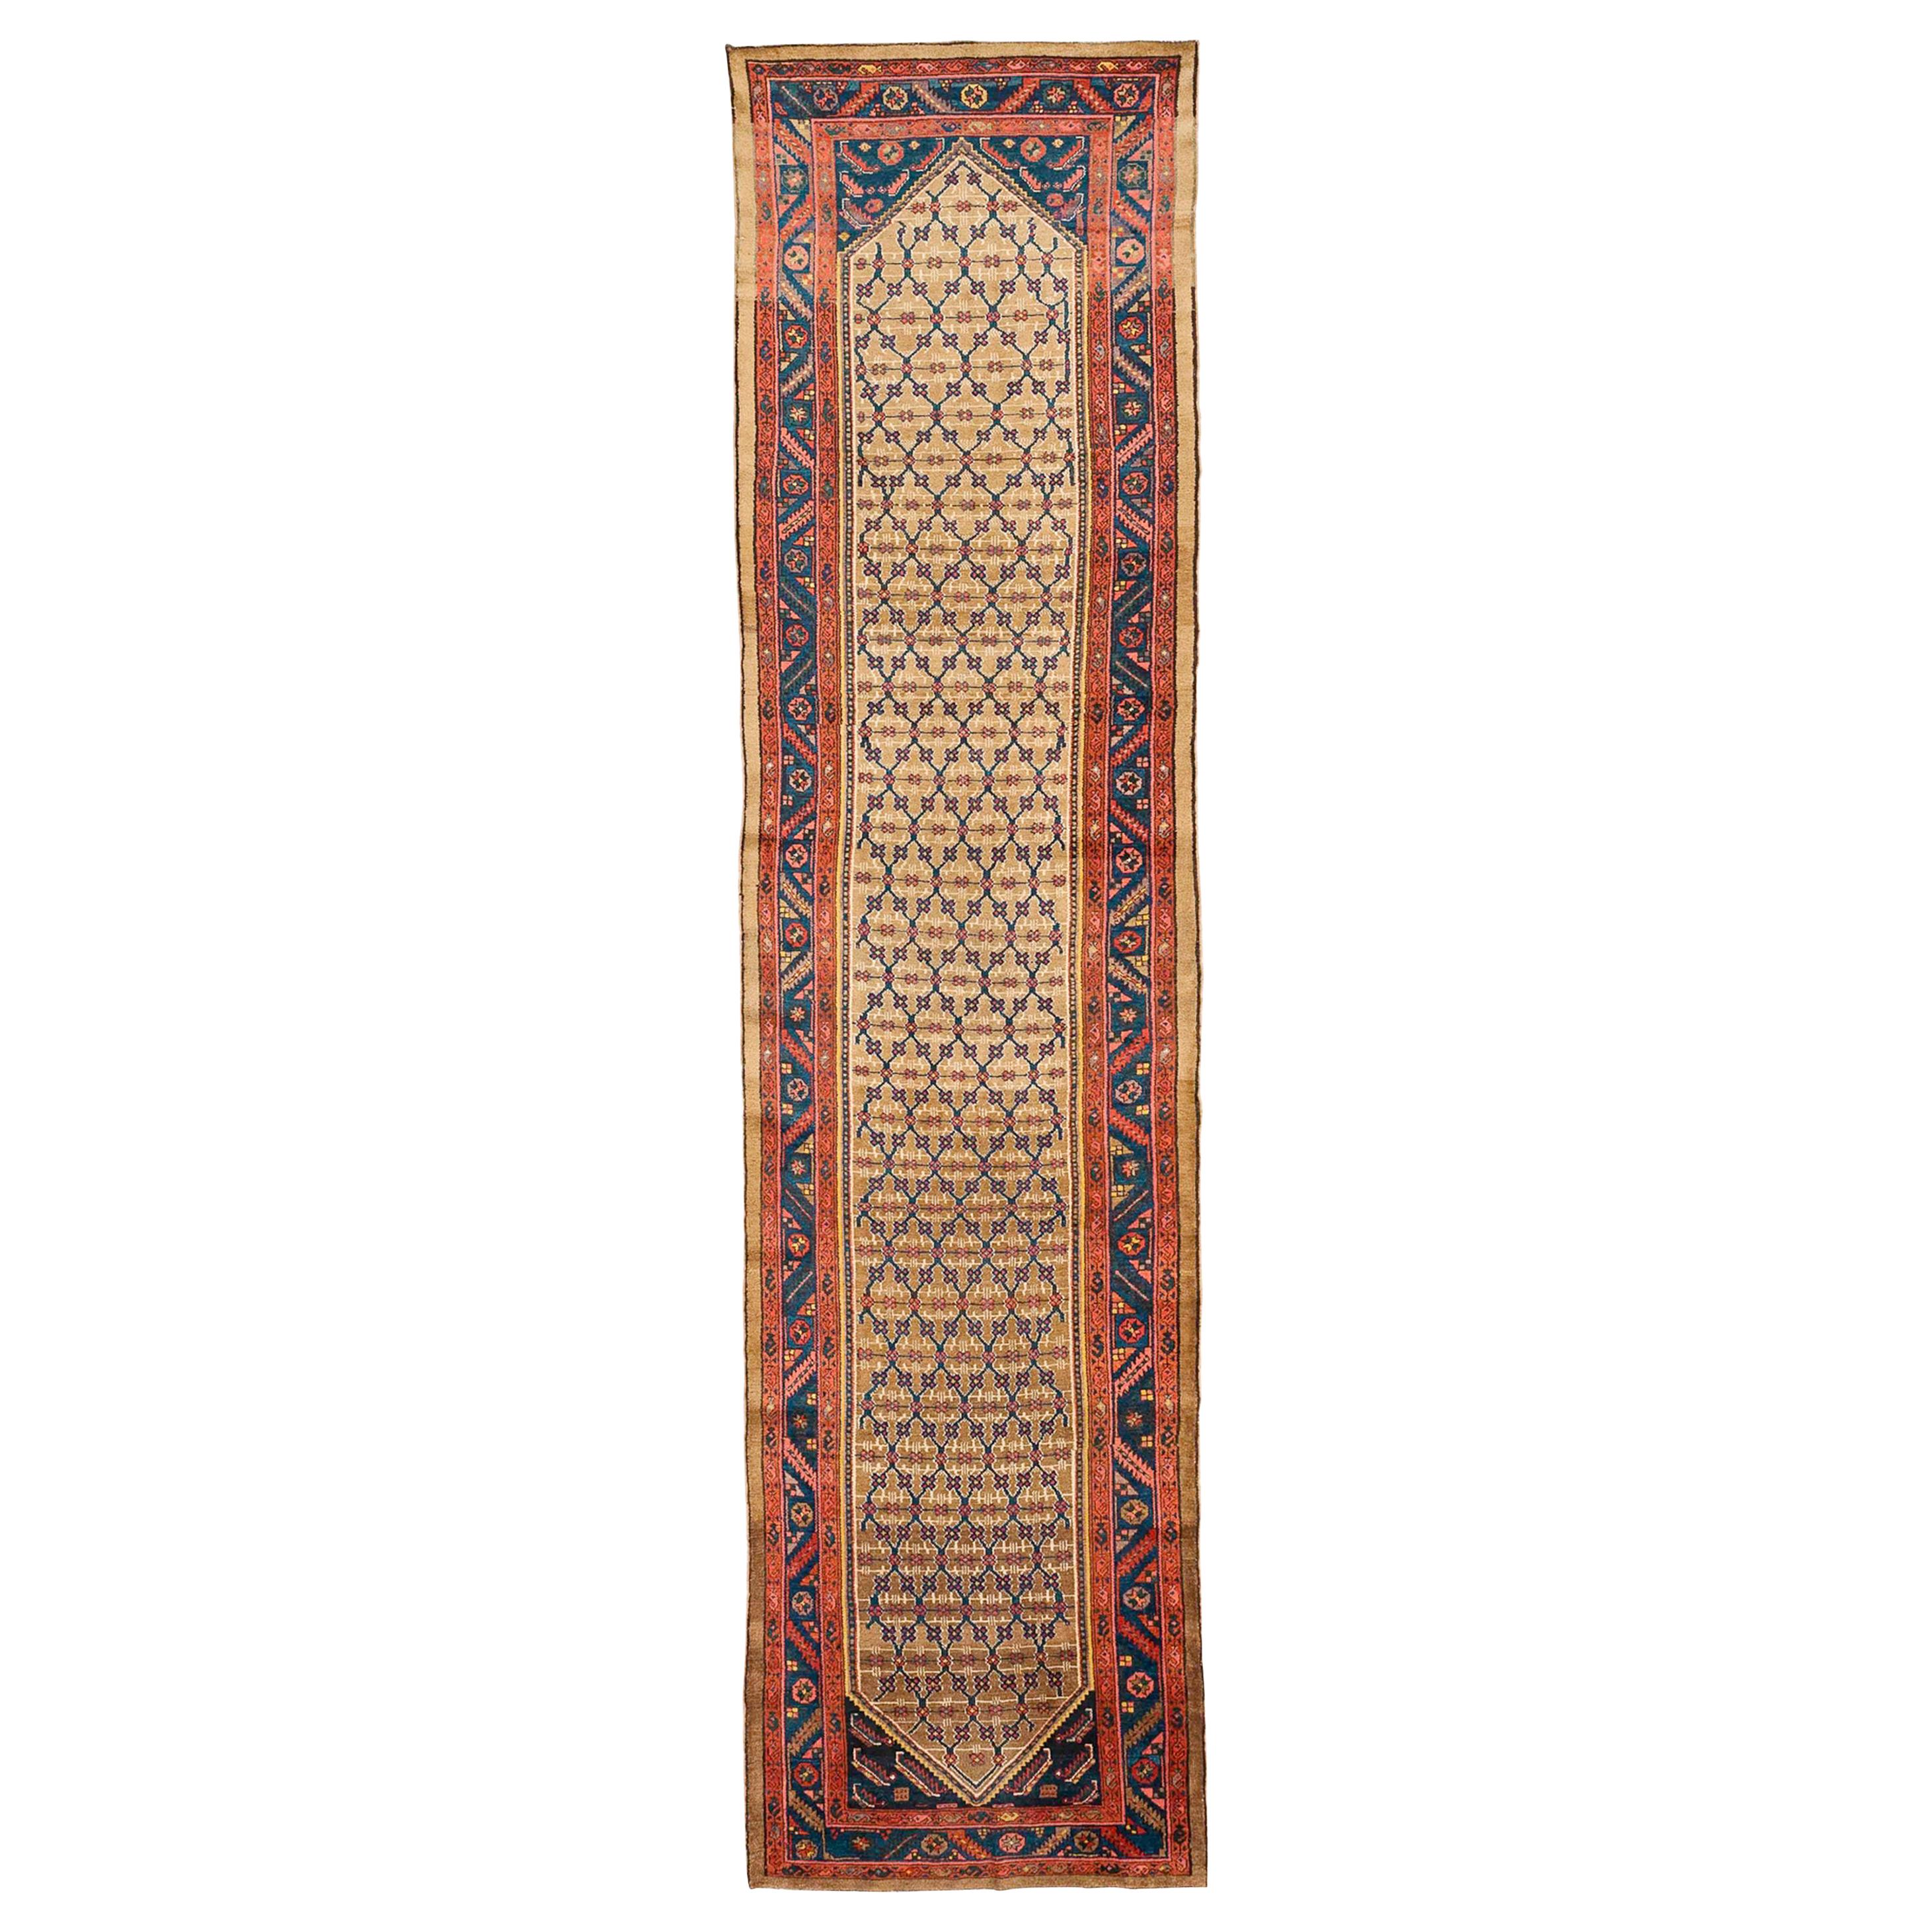 Antique Persian Sarab Runner Rug with Navy and Brown Floral Details